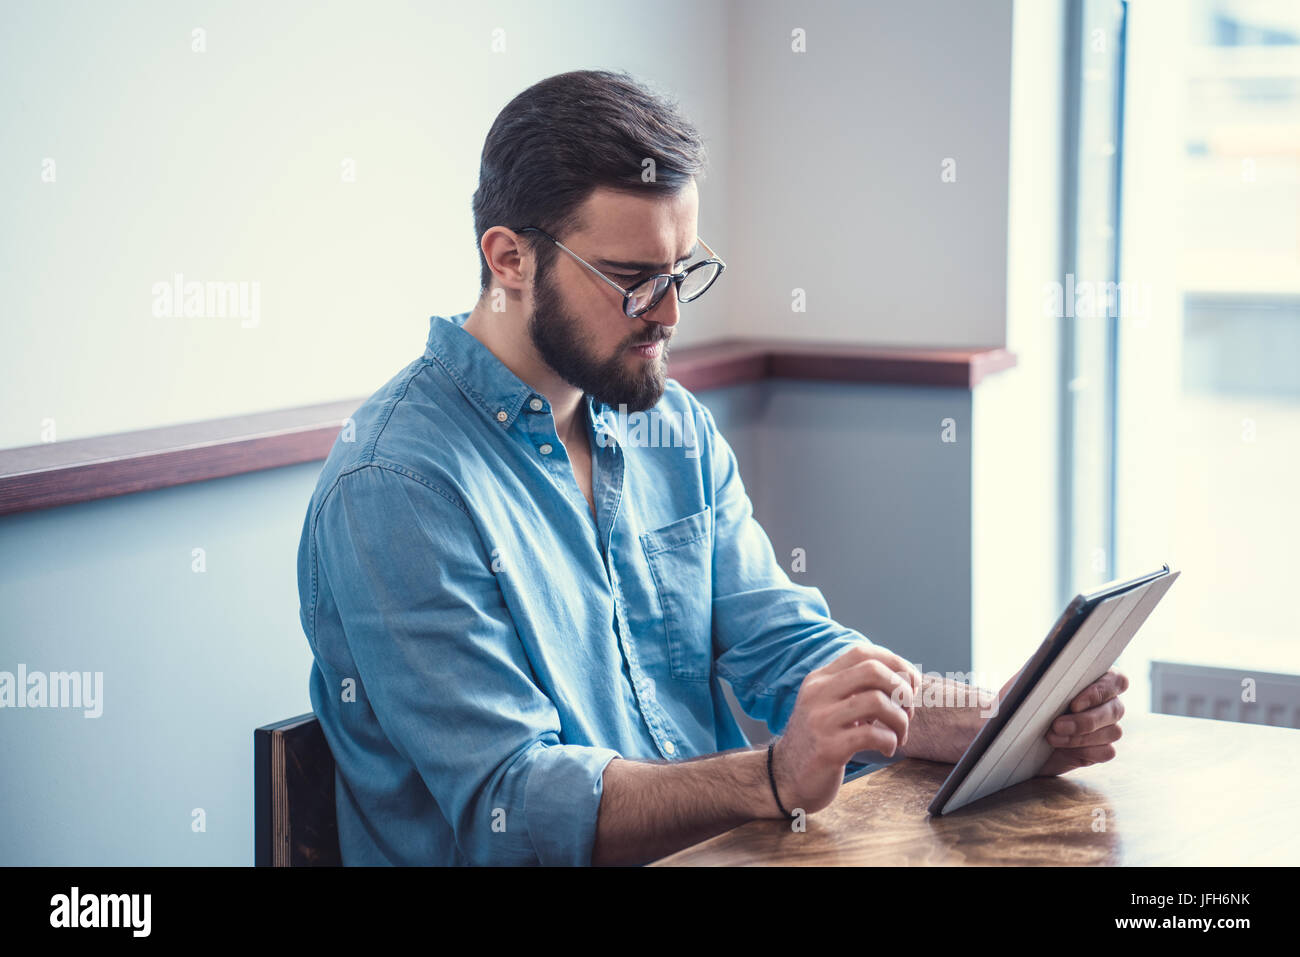 Hipster with glasses Stock Photo